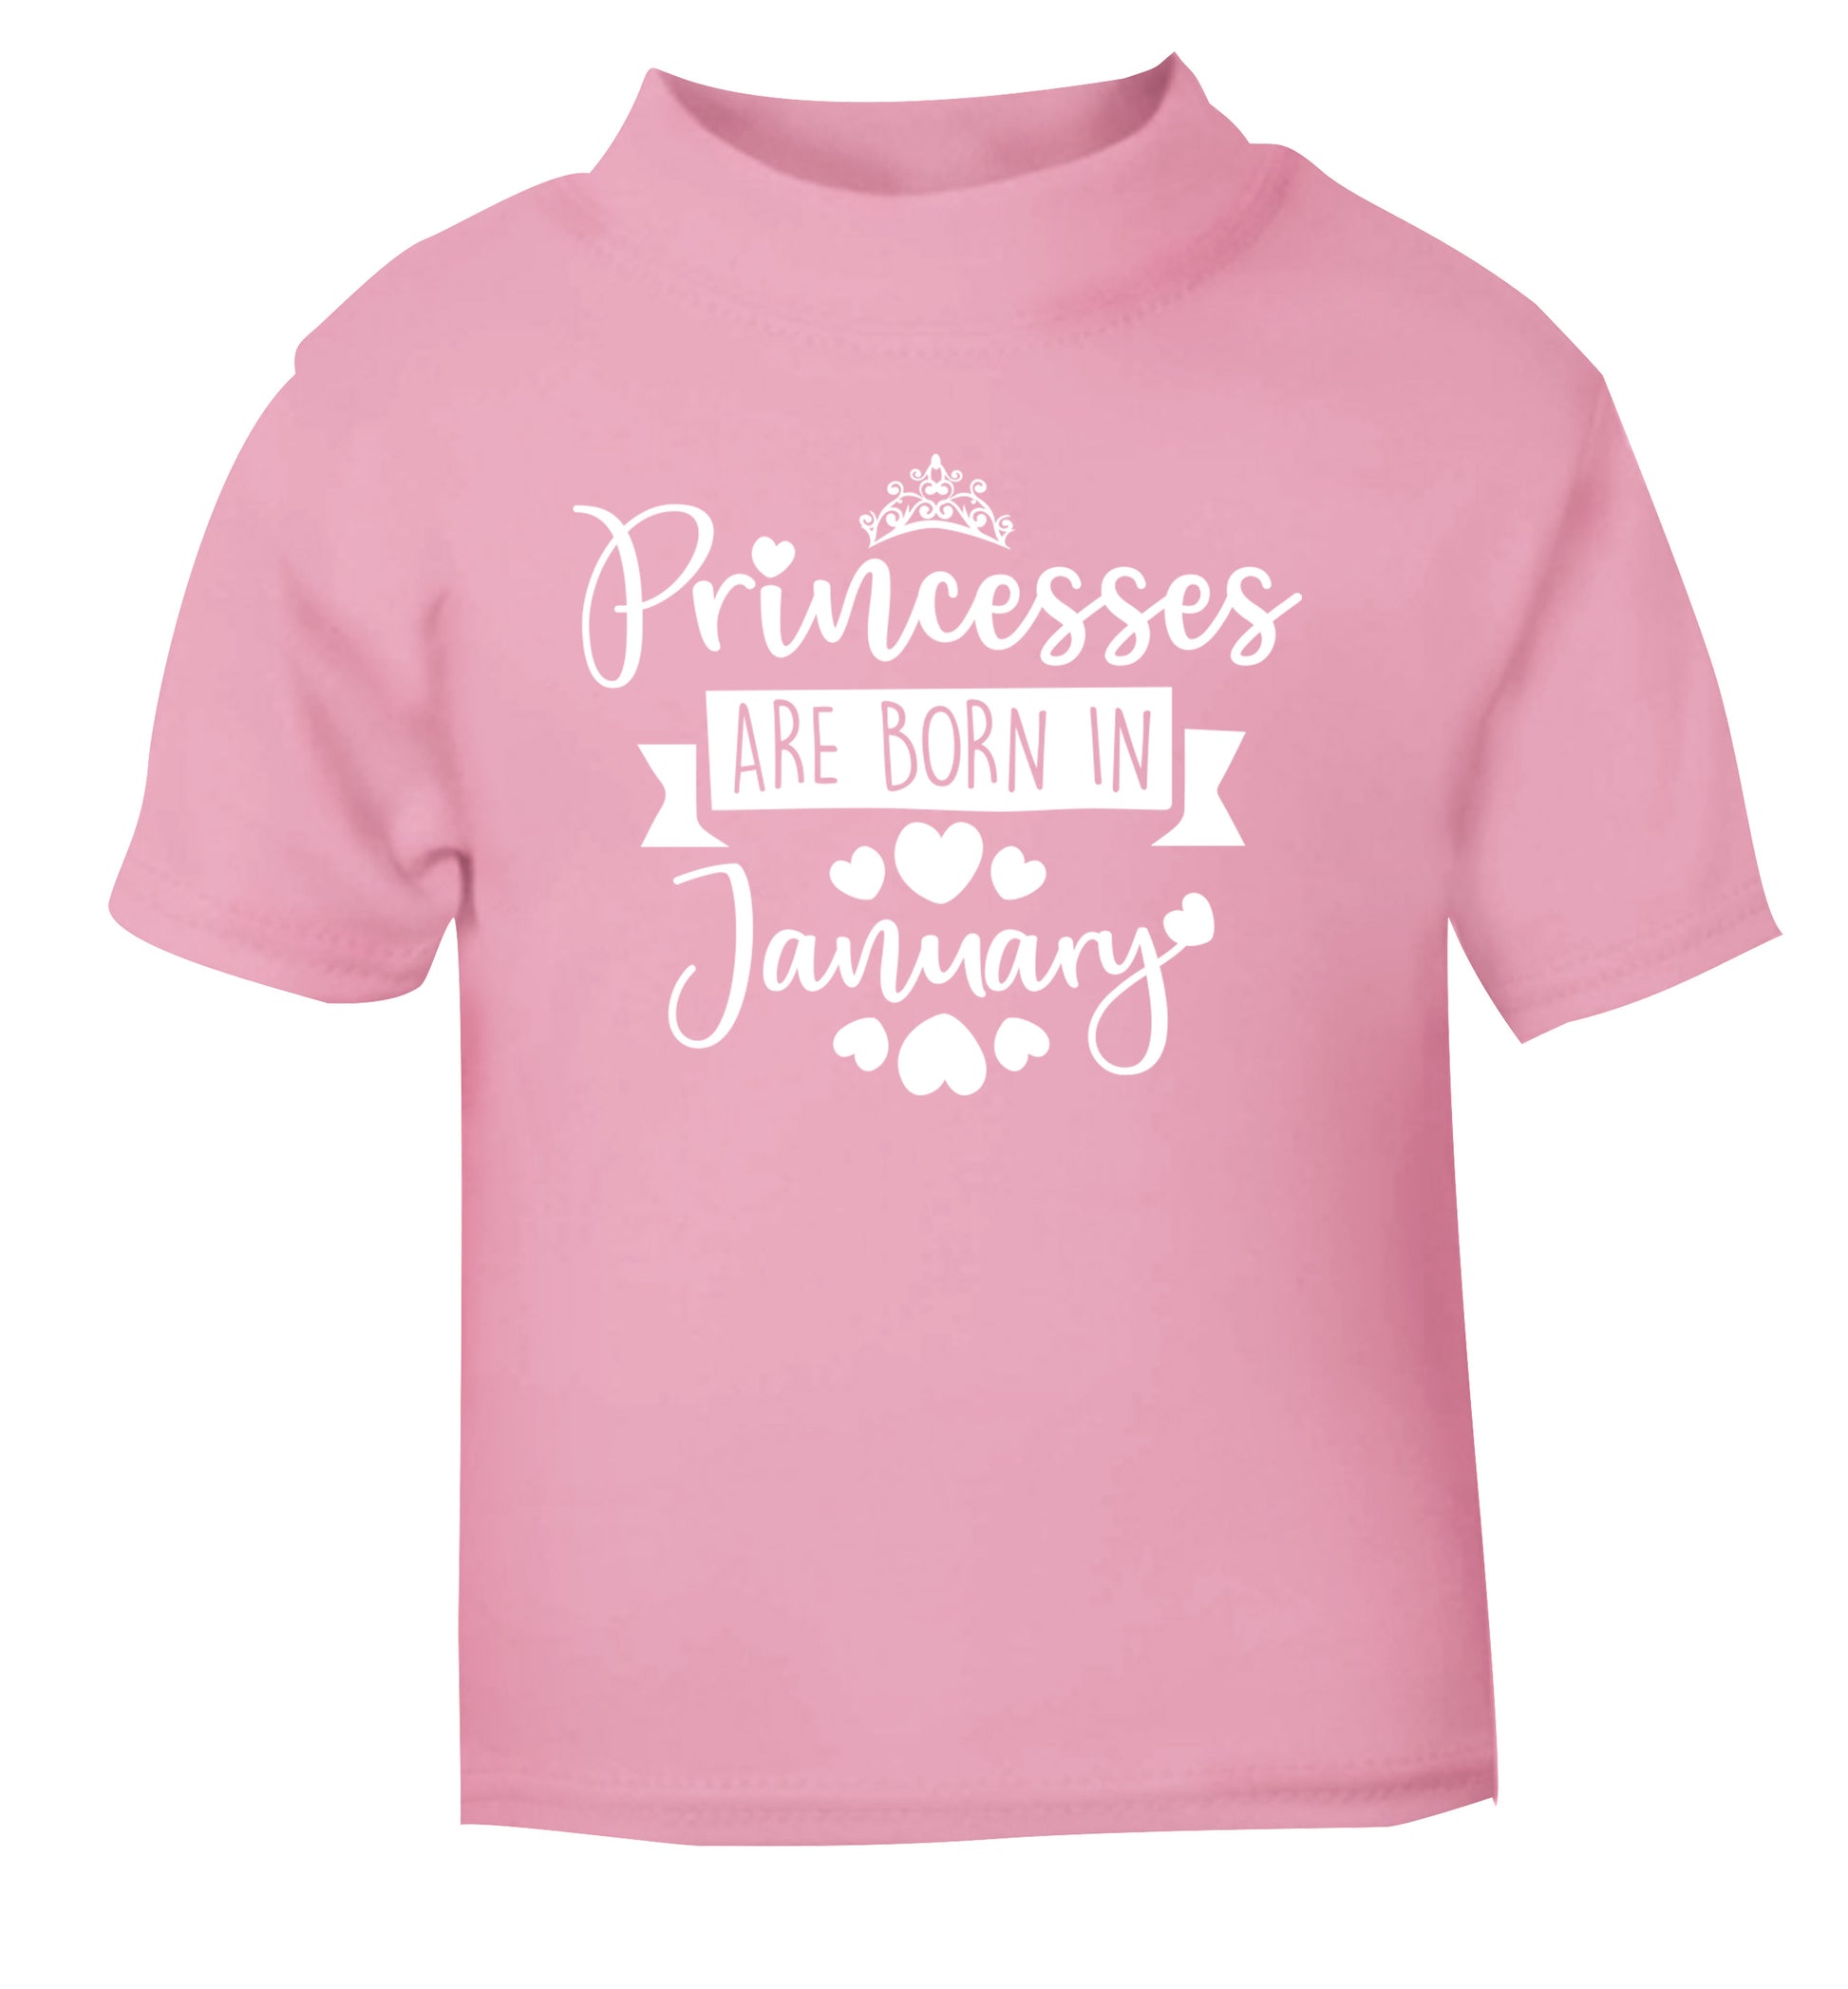 Princesses are born in January light pink Baby Toddler Tshirt 2 Years